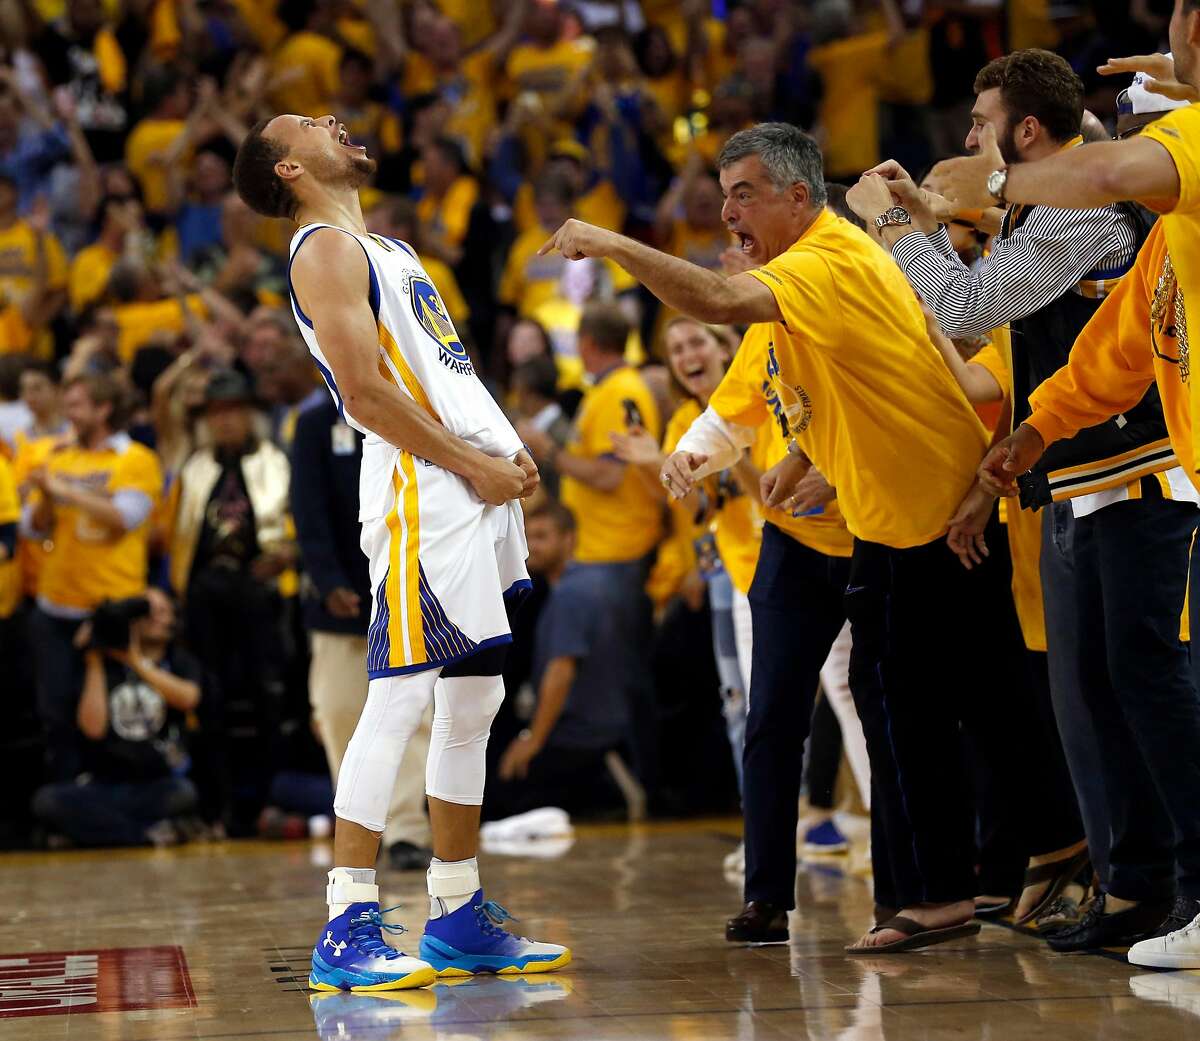 Golden State Warriors' Stephen Curry and Apple's Eddy Cue celebrates Curry's 3-pointer in final minute of 96-88 win over Oklahoma City Thunder in Game 7 of NBA Playoffs' Western Conference finals at Oracle Arena in Oakland, Calif., on Monday, May 30, 2016.